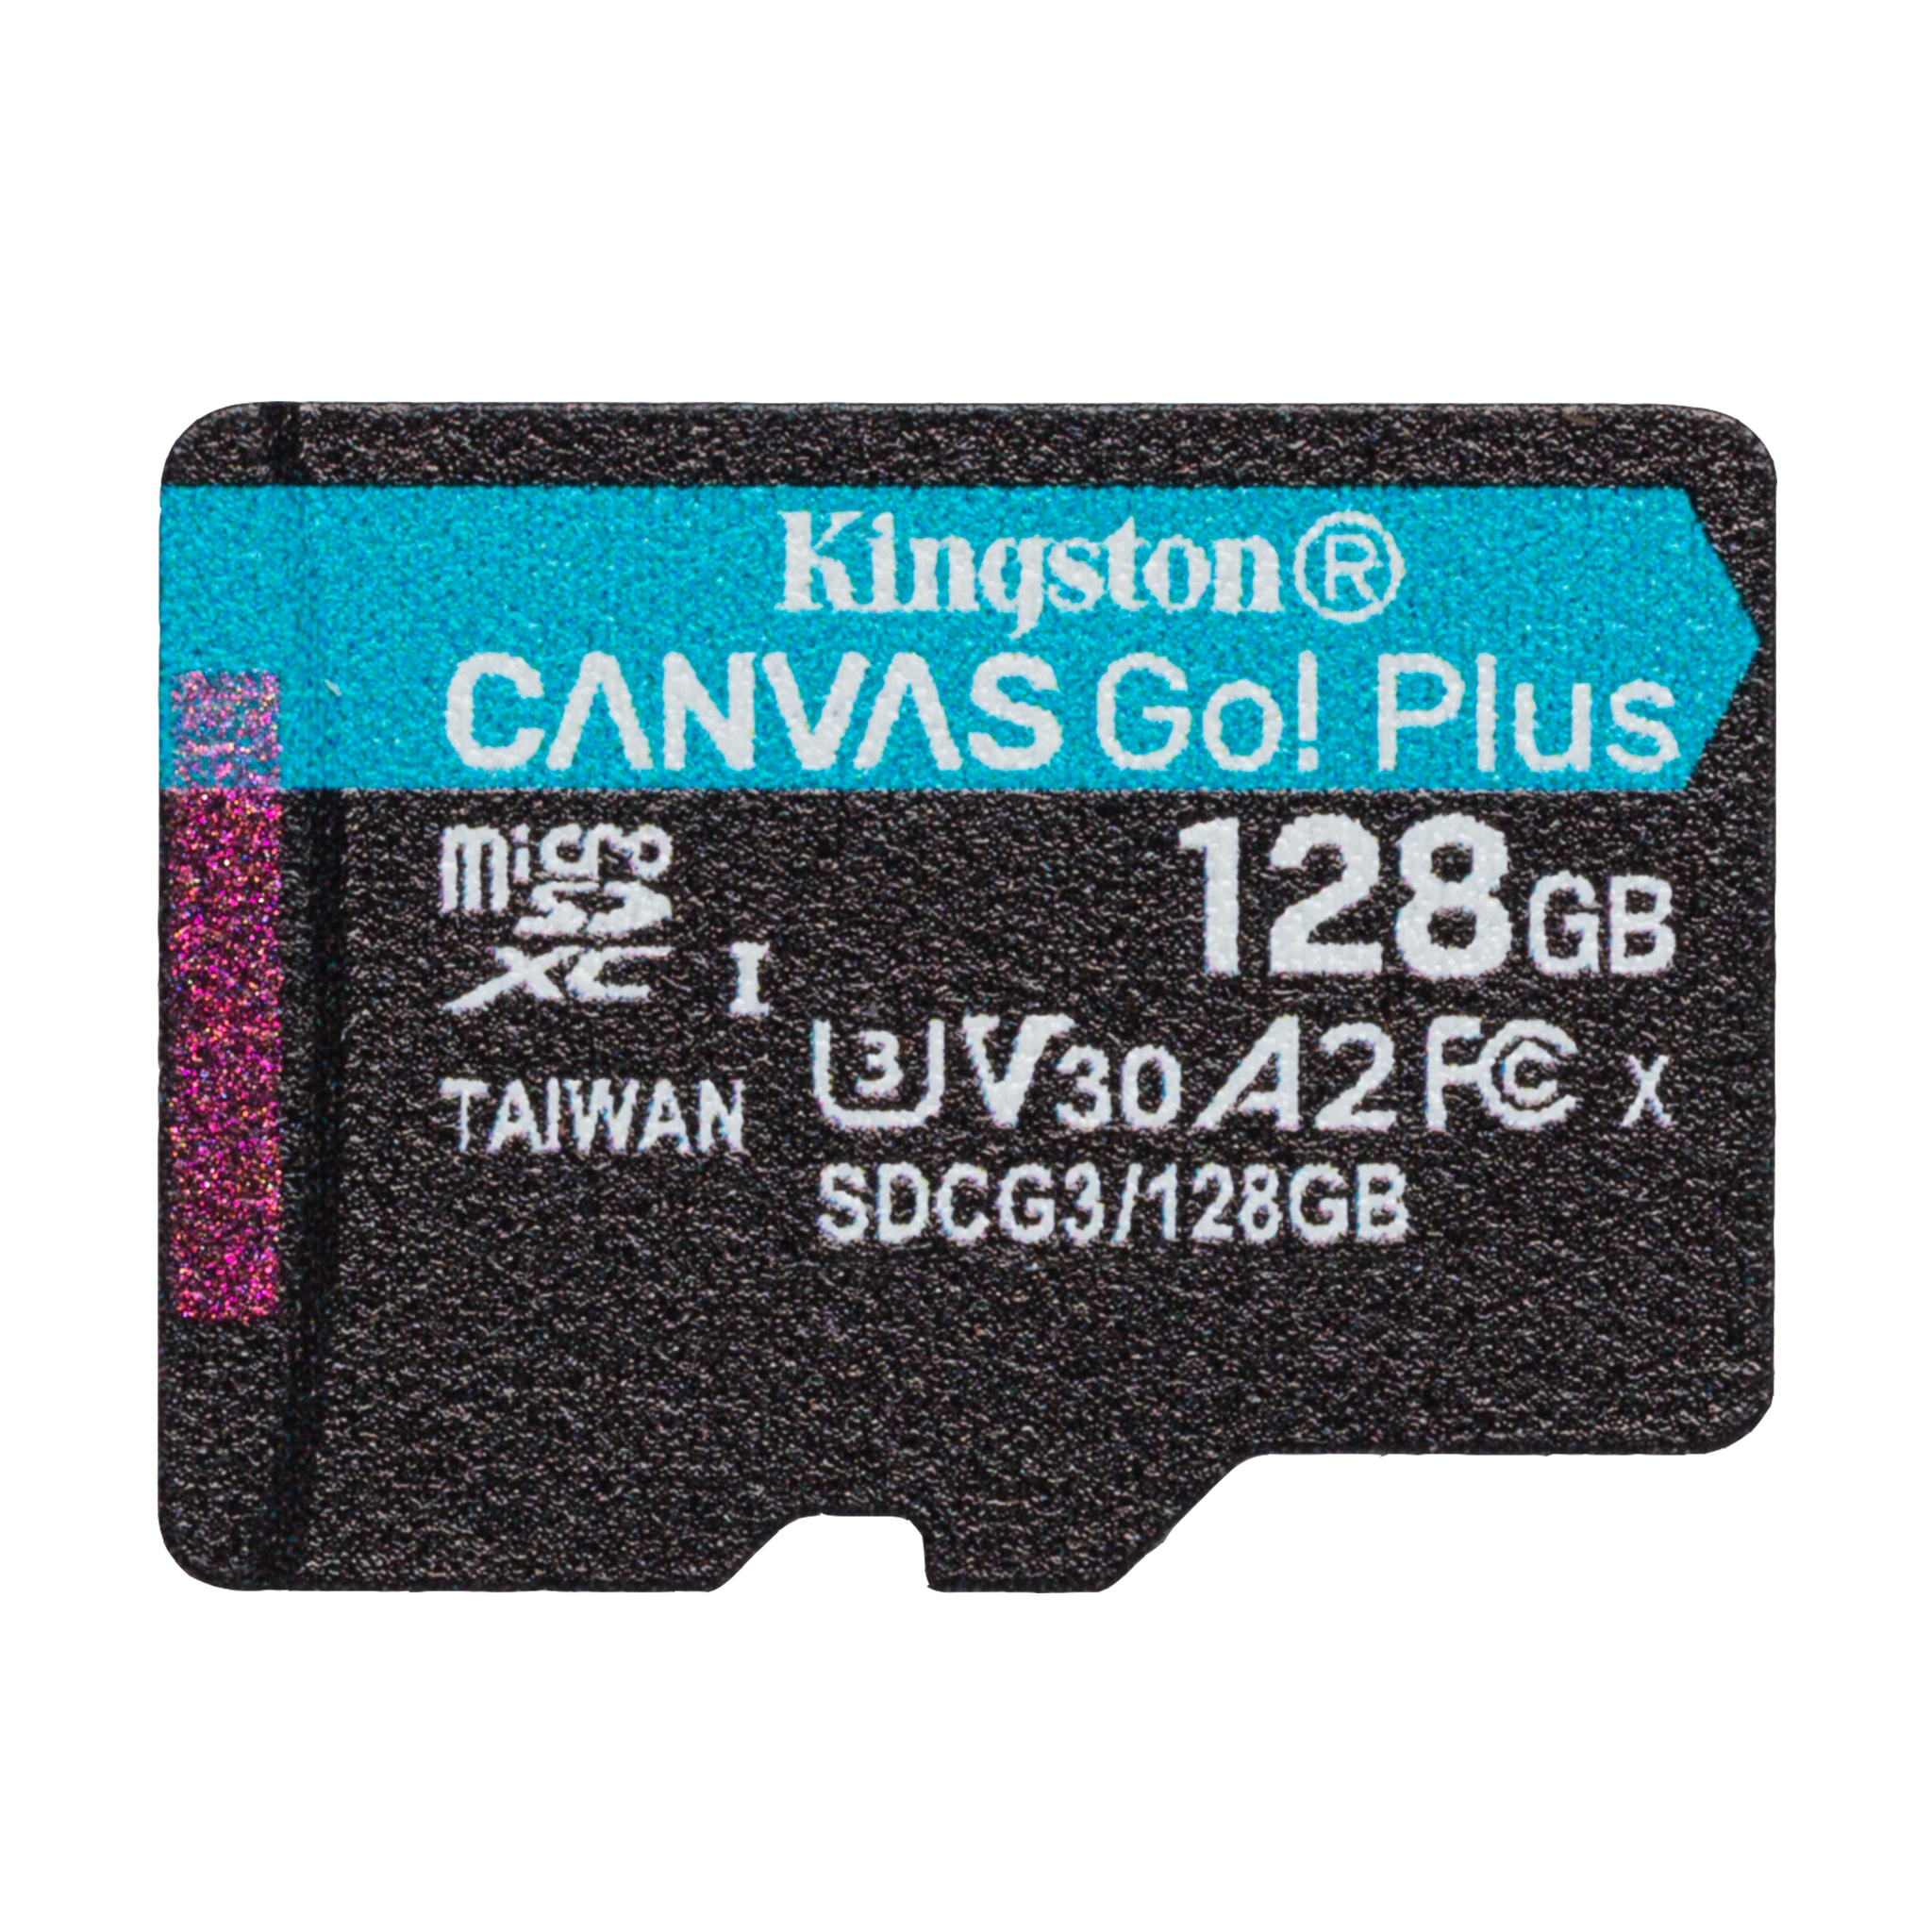 Kingston 32GB Asus Fonepad Note 6 MicroSDHC Canvas Select Plus Card Verified by SanFlash. 100MBs Works with Kingston